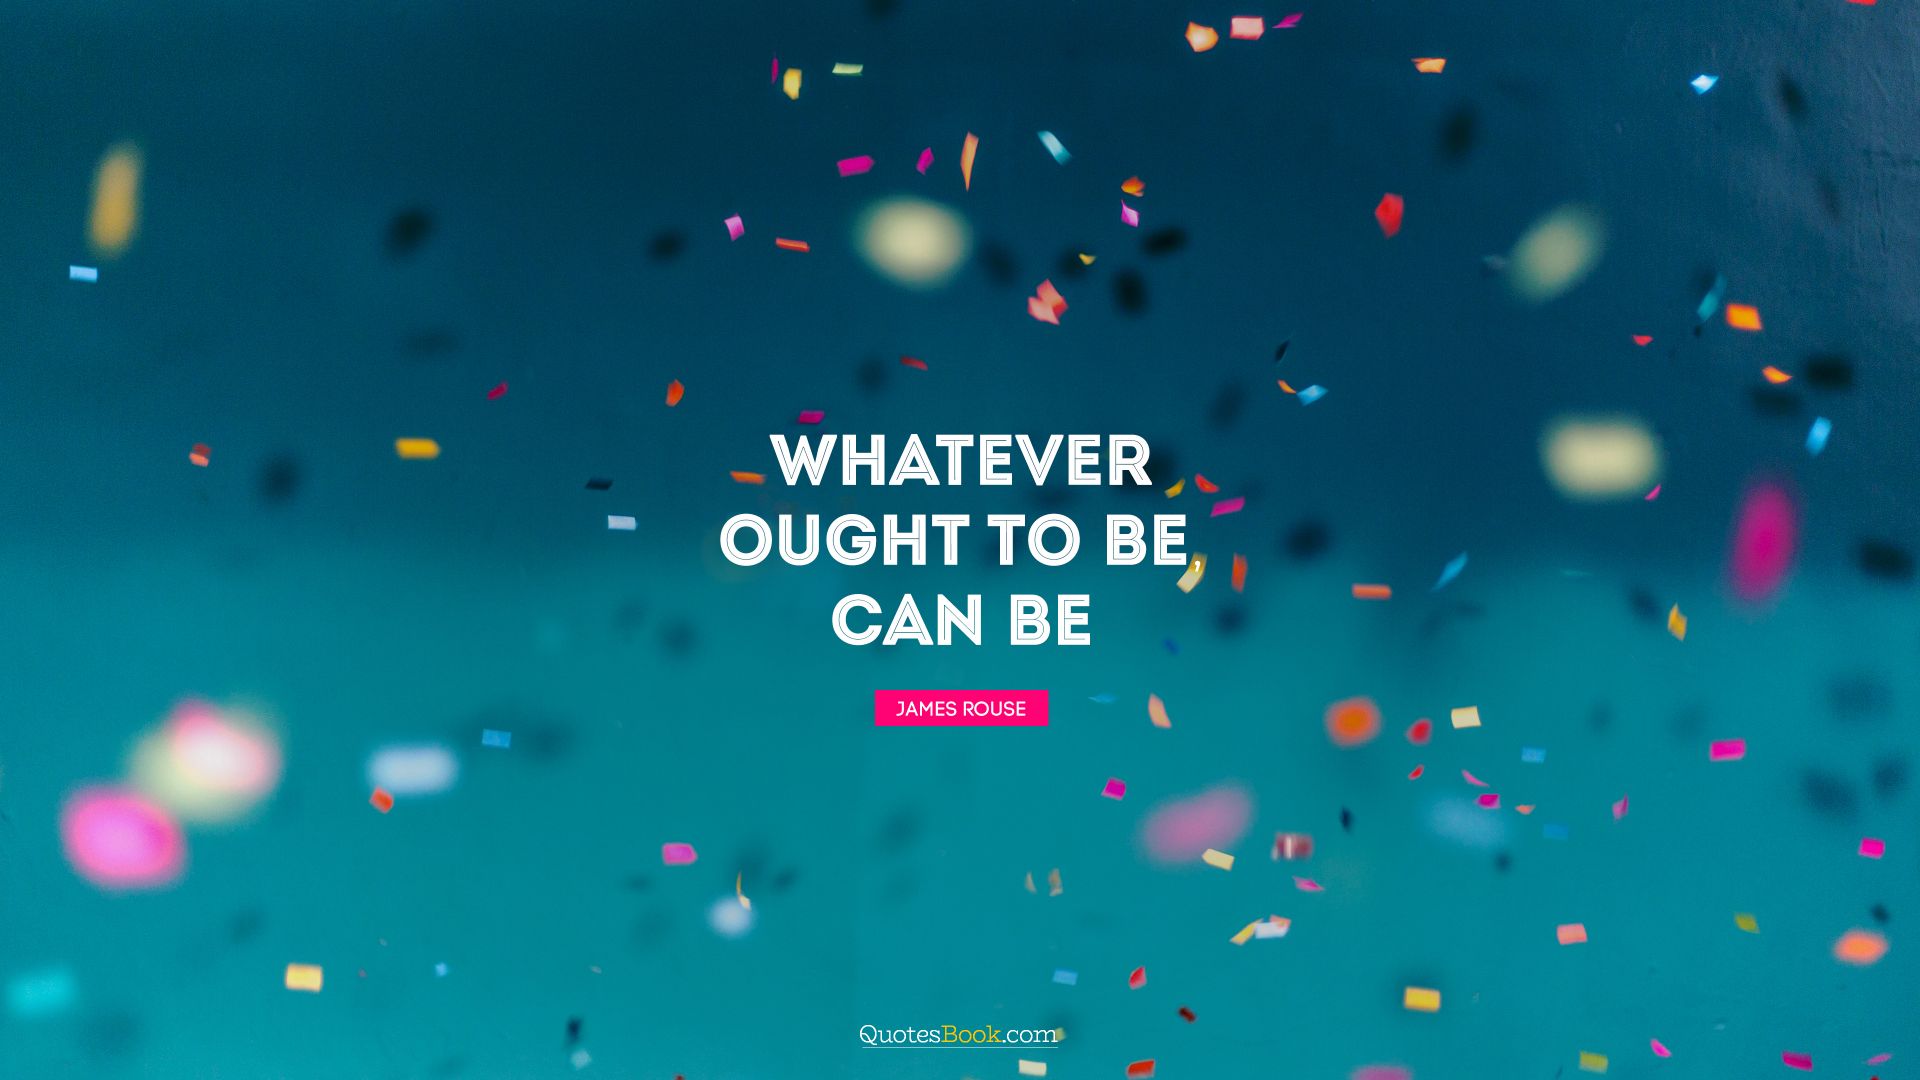 Whatever ought to be, can be. - Quote by James Rouse